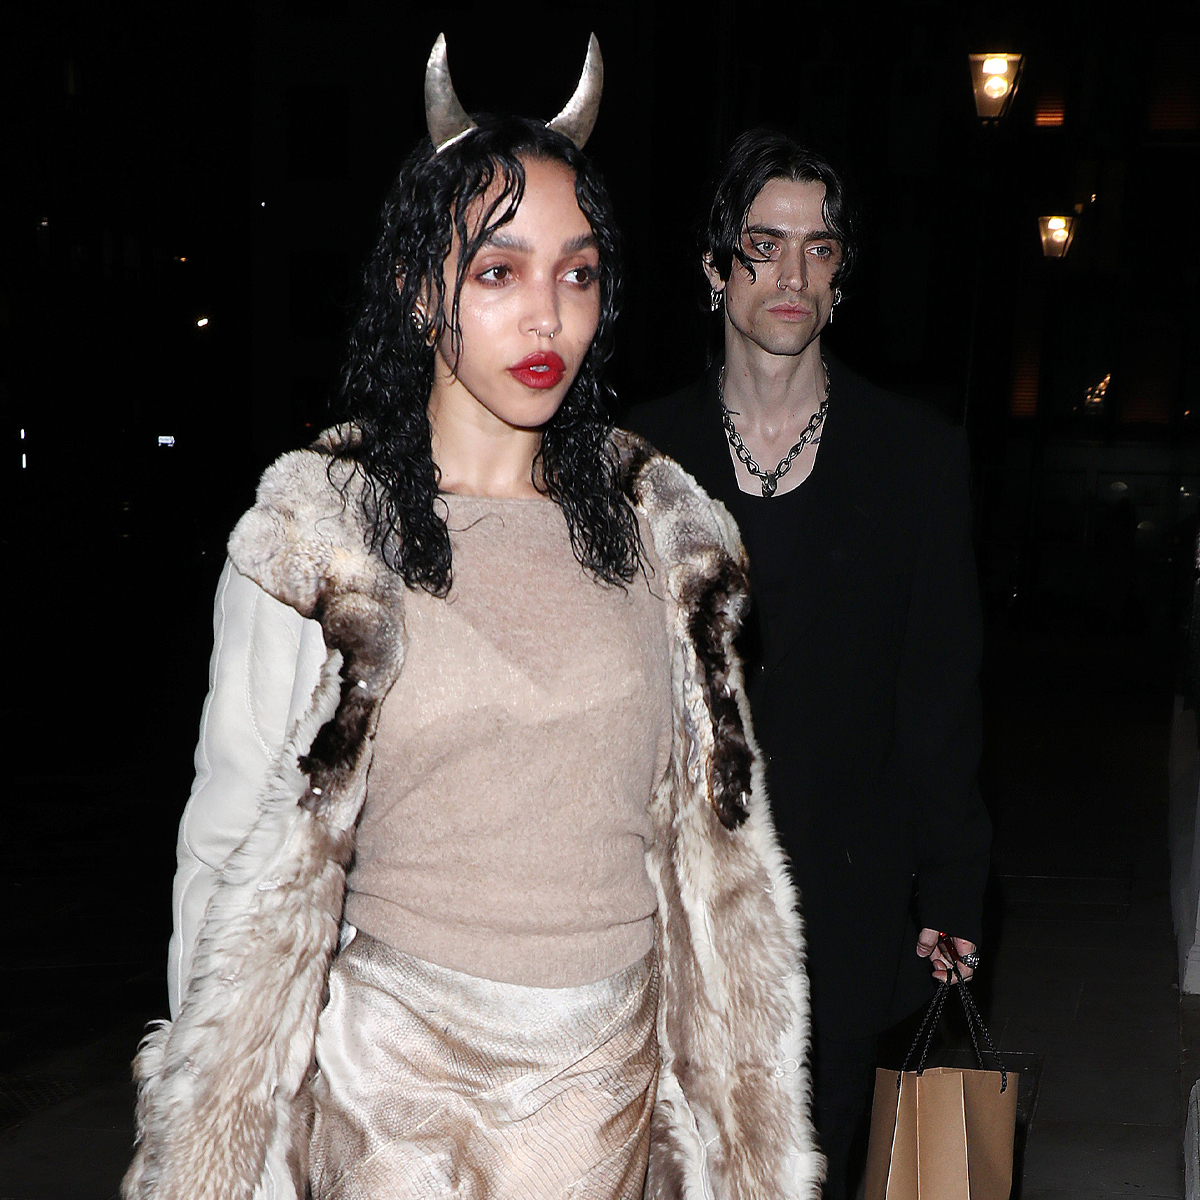 FKA twigs: 'Sometimes, standing up for yourself is messy. But I did and I'm  proud of it